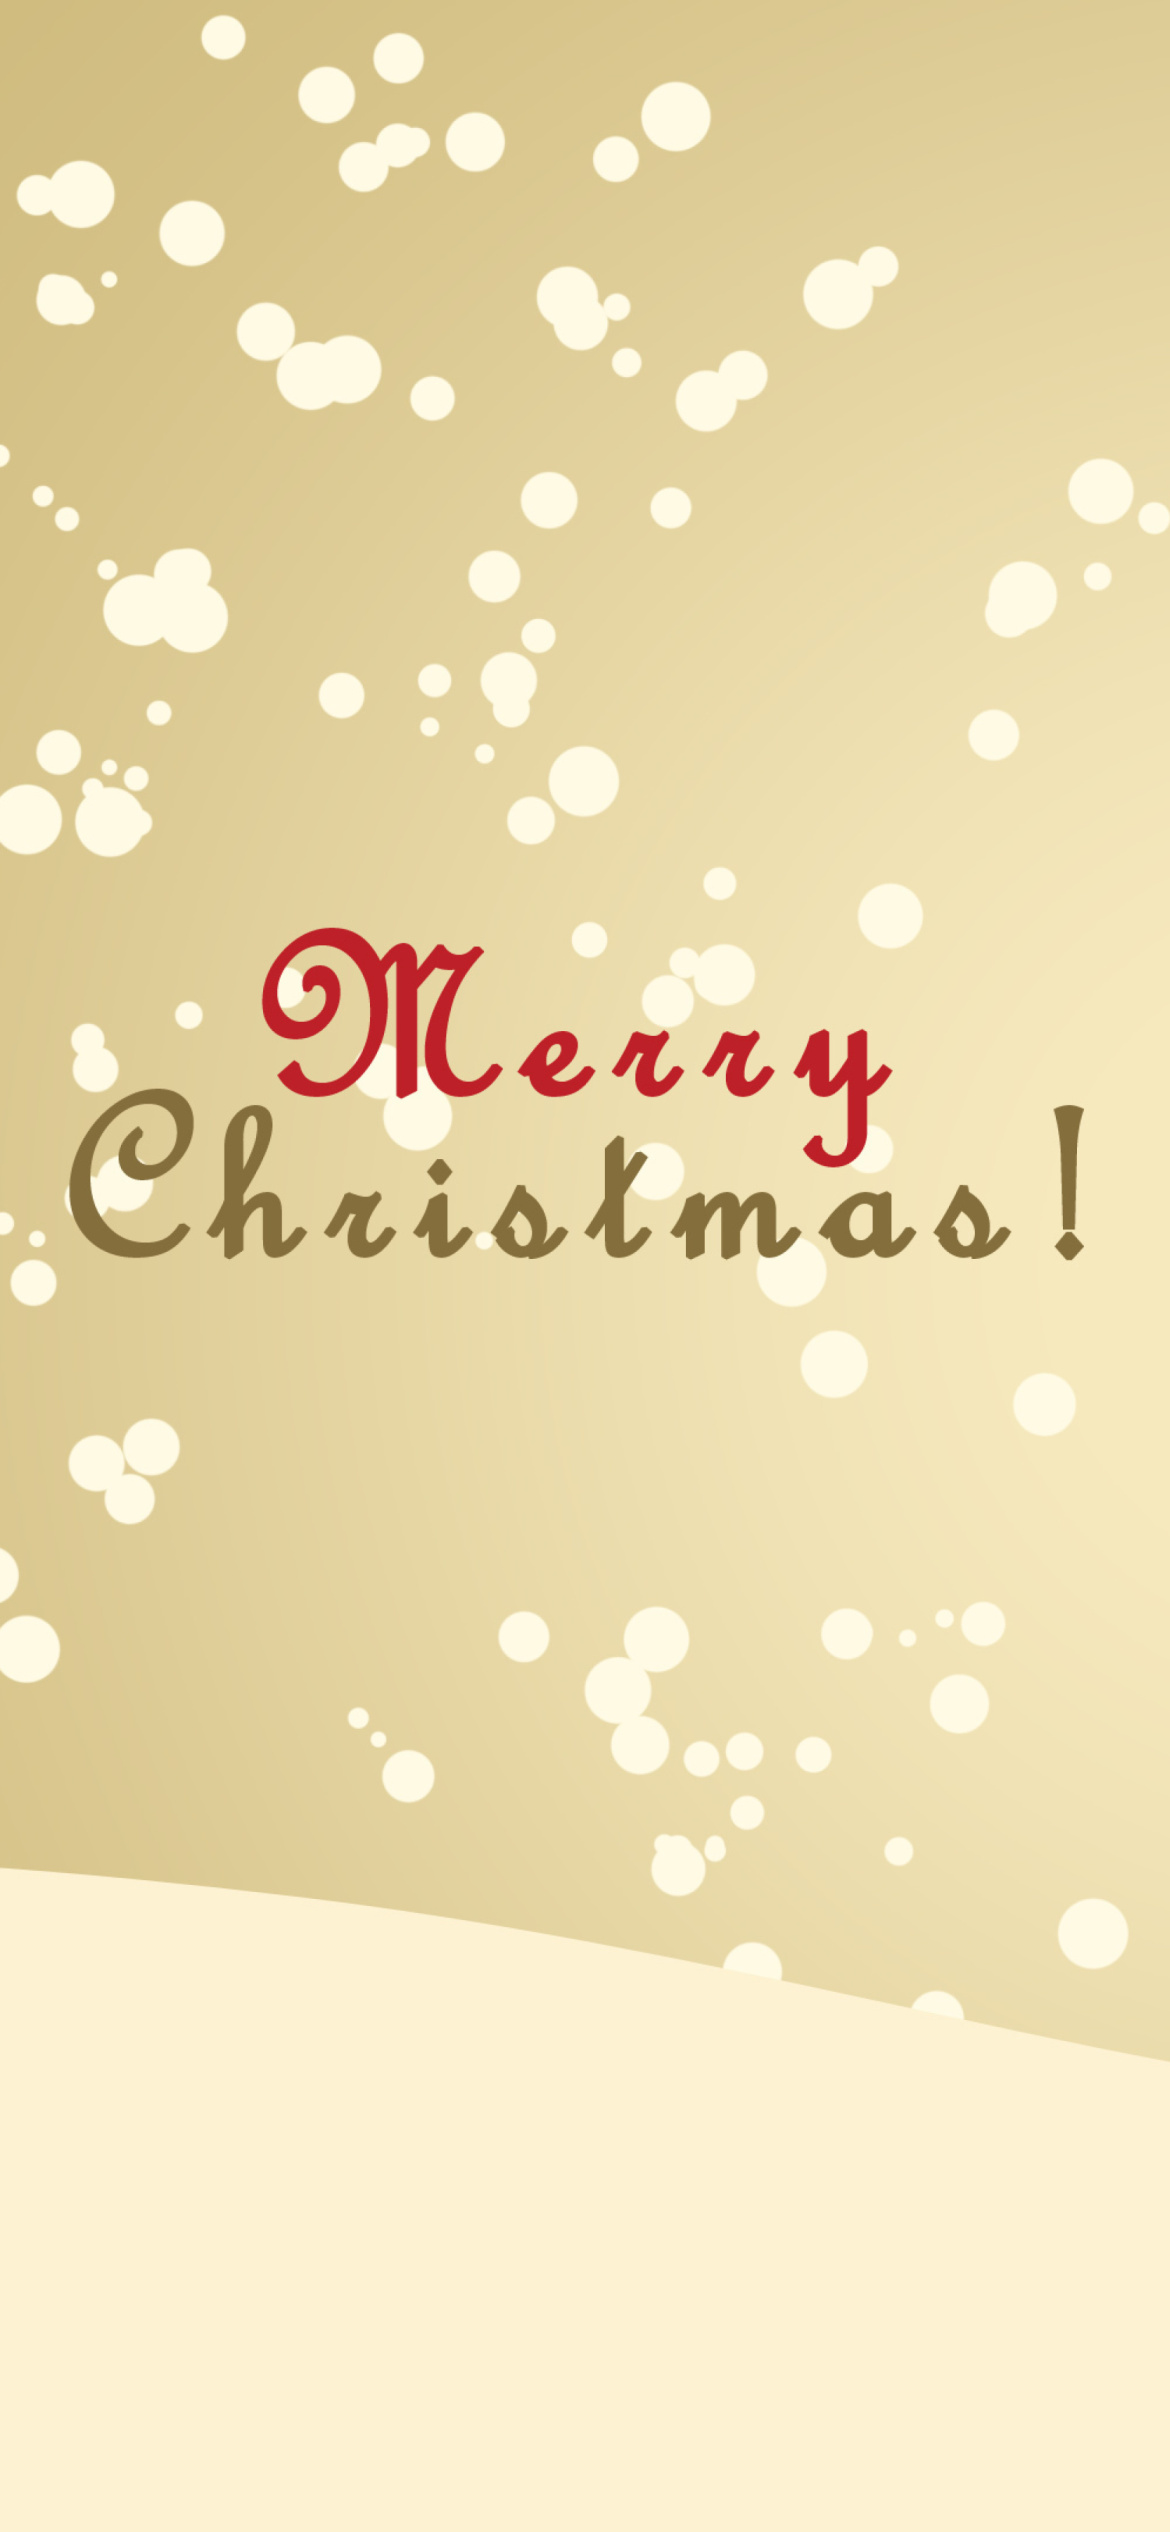 Merry Christmas Wishes from Snowman wallpaper 1170x2532